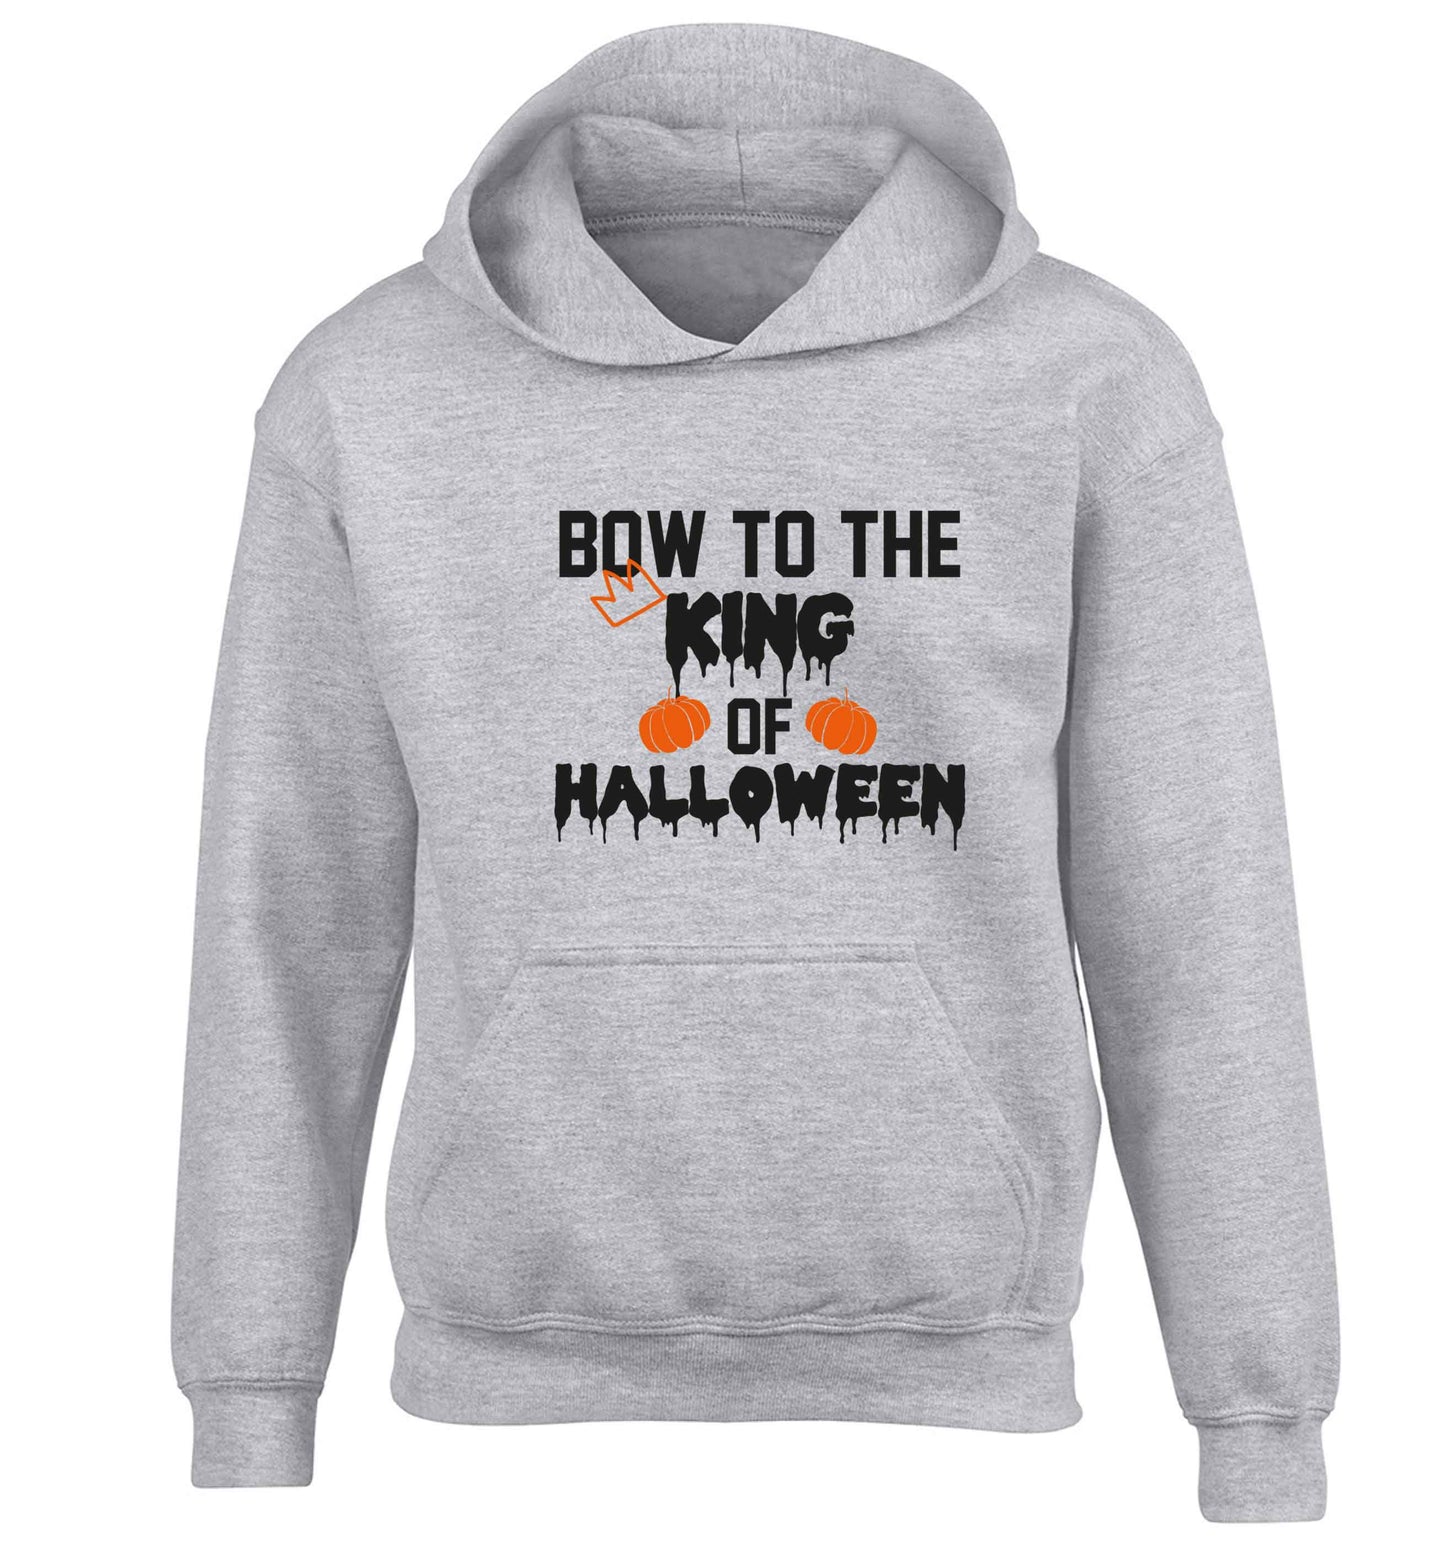 Bow to the King of halloween children's grey hoodie 12-13 Years